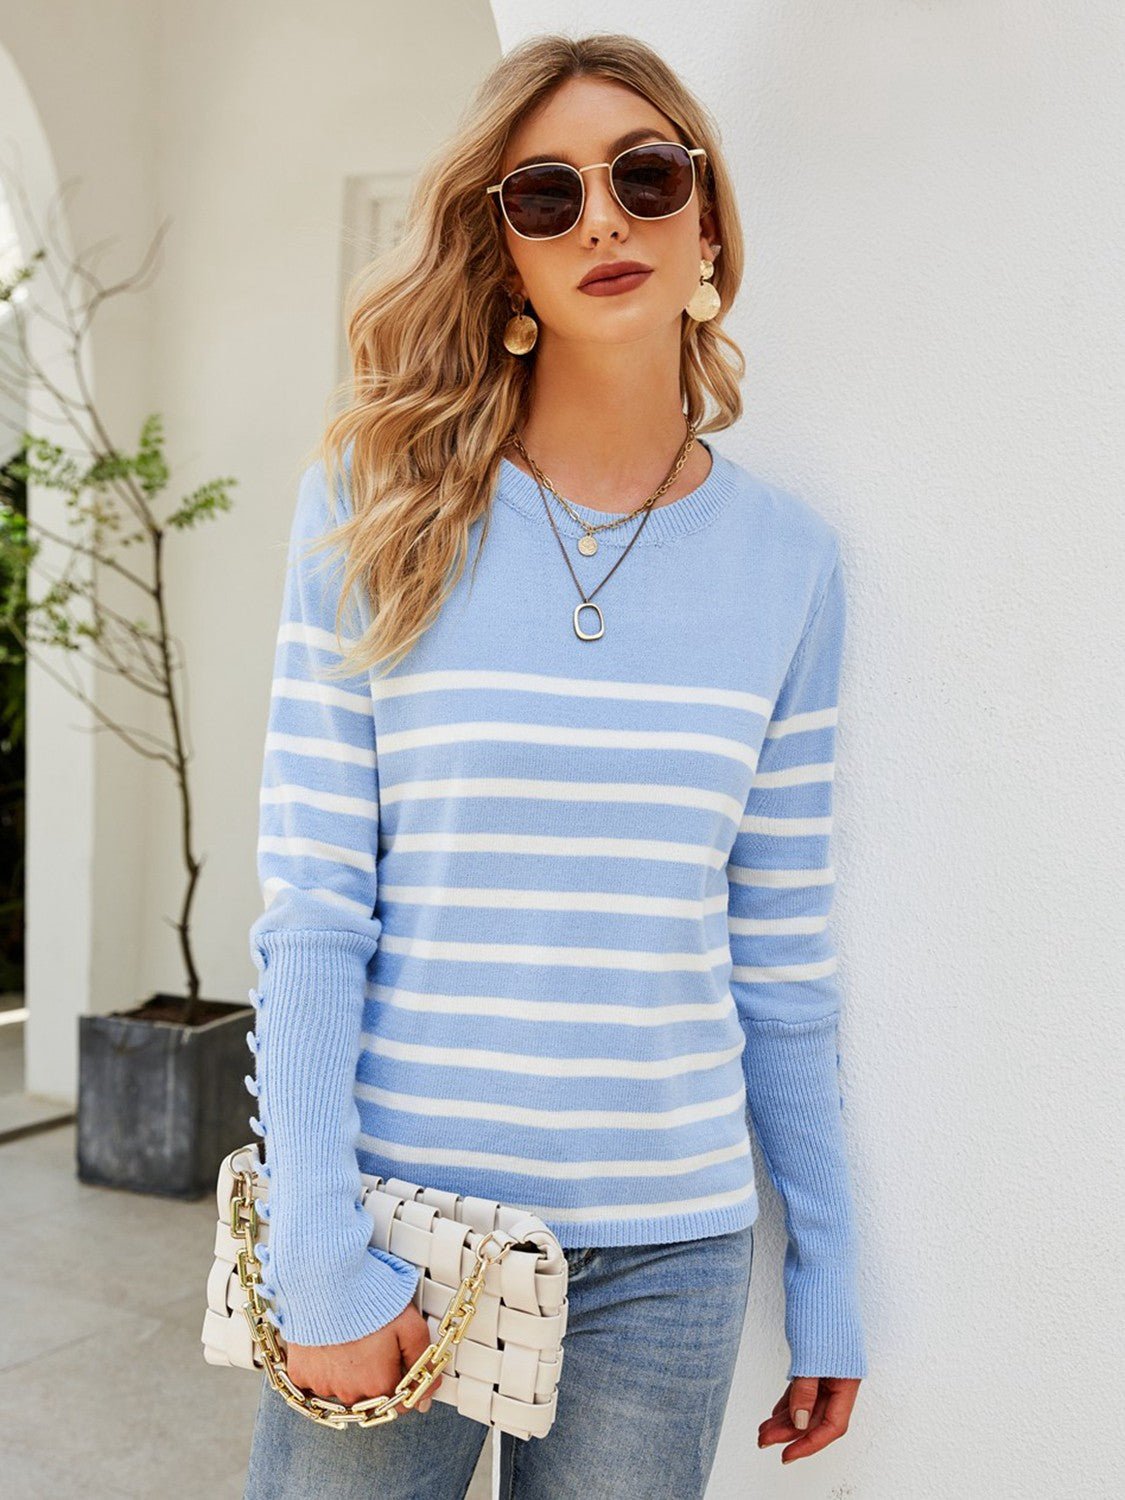 Striped Decorative Button Knit Top  | KIKI COUTURE-Women's Clothing, Designer Fashions, Shoes, Bags